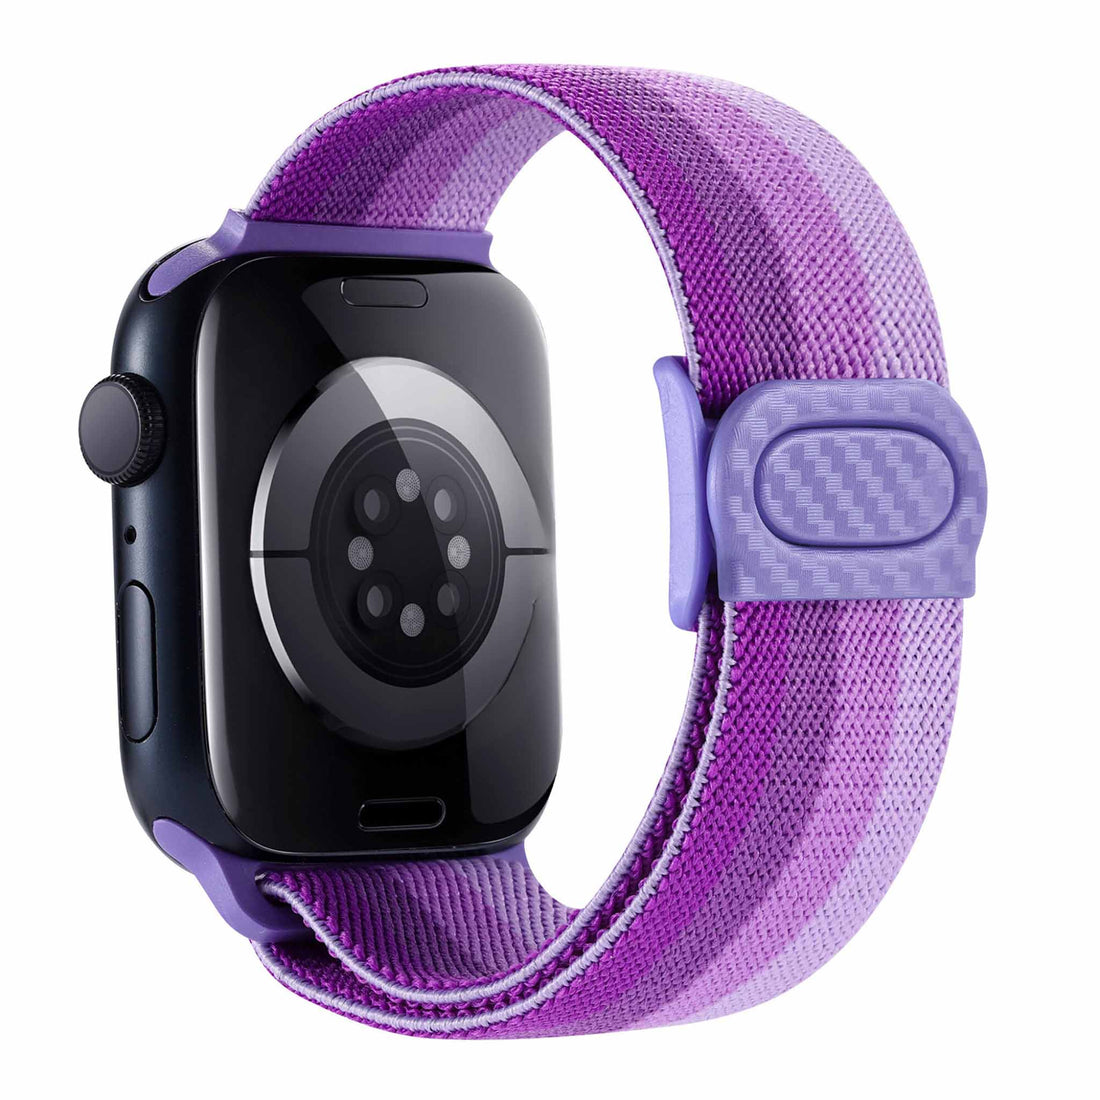 Alternate text: "Smartwatch with a blue woven loop band and black watch case with sensors visible on the back, isolated on a white background."